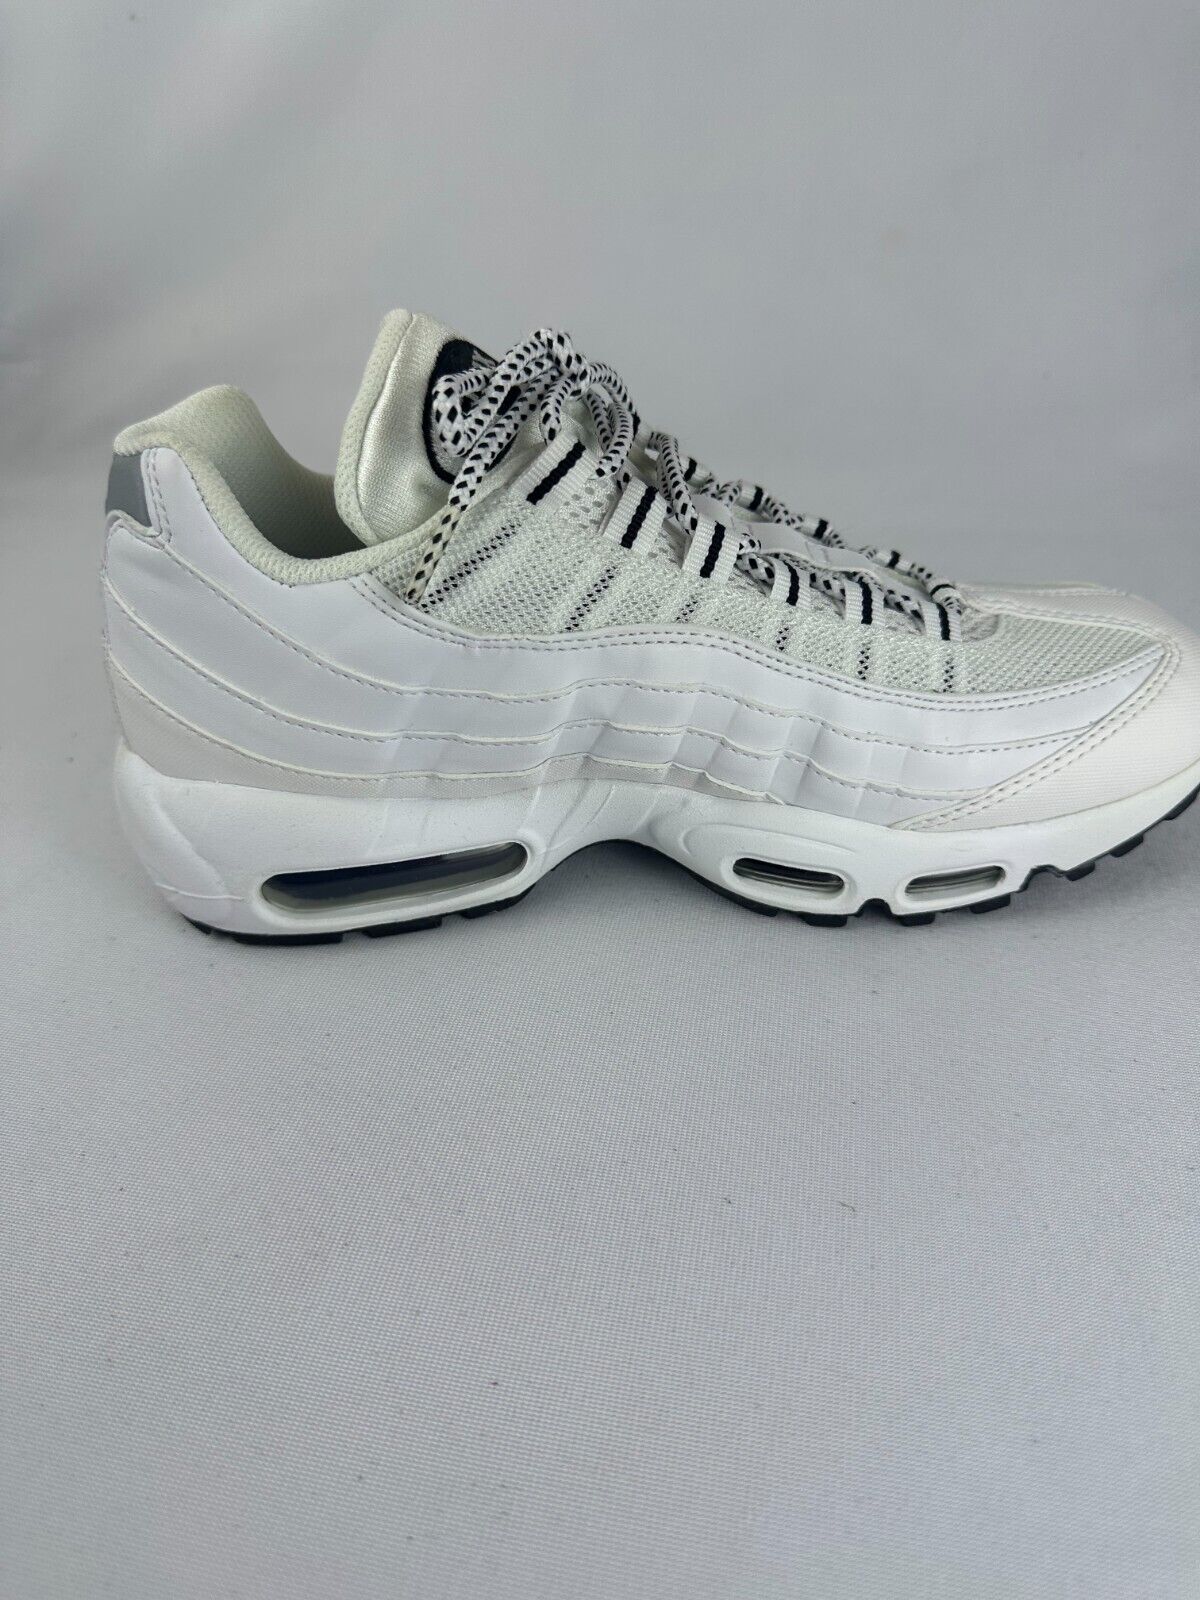 Nike Mens 8.5 Air Max 95 'White/Black' Athletic Running Shoes Sneakes 609048-109